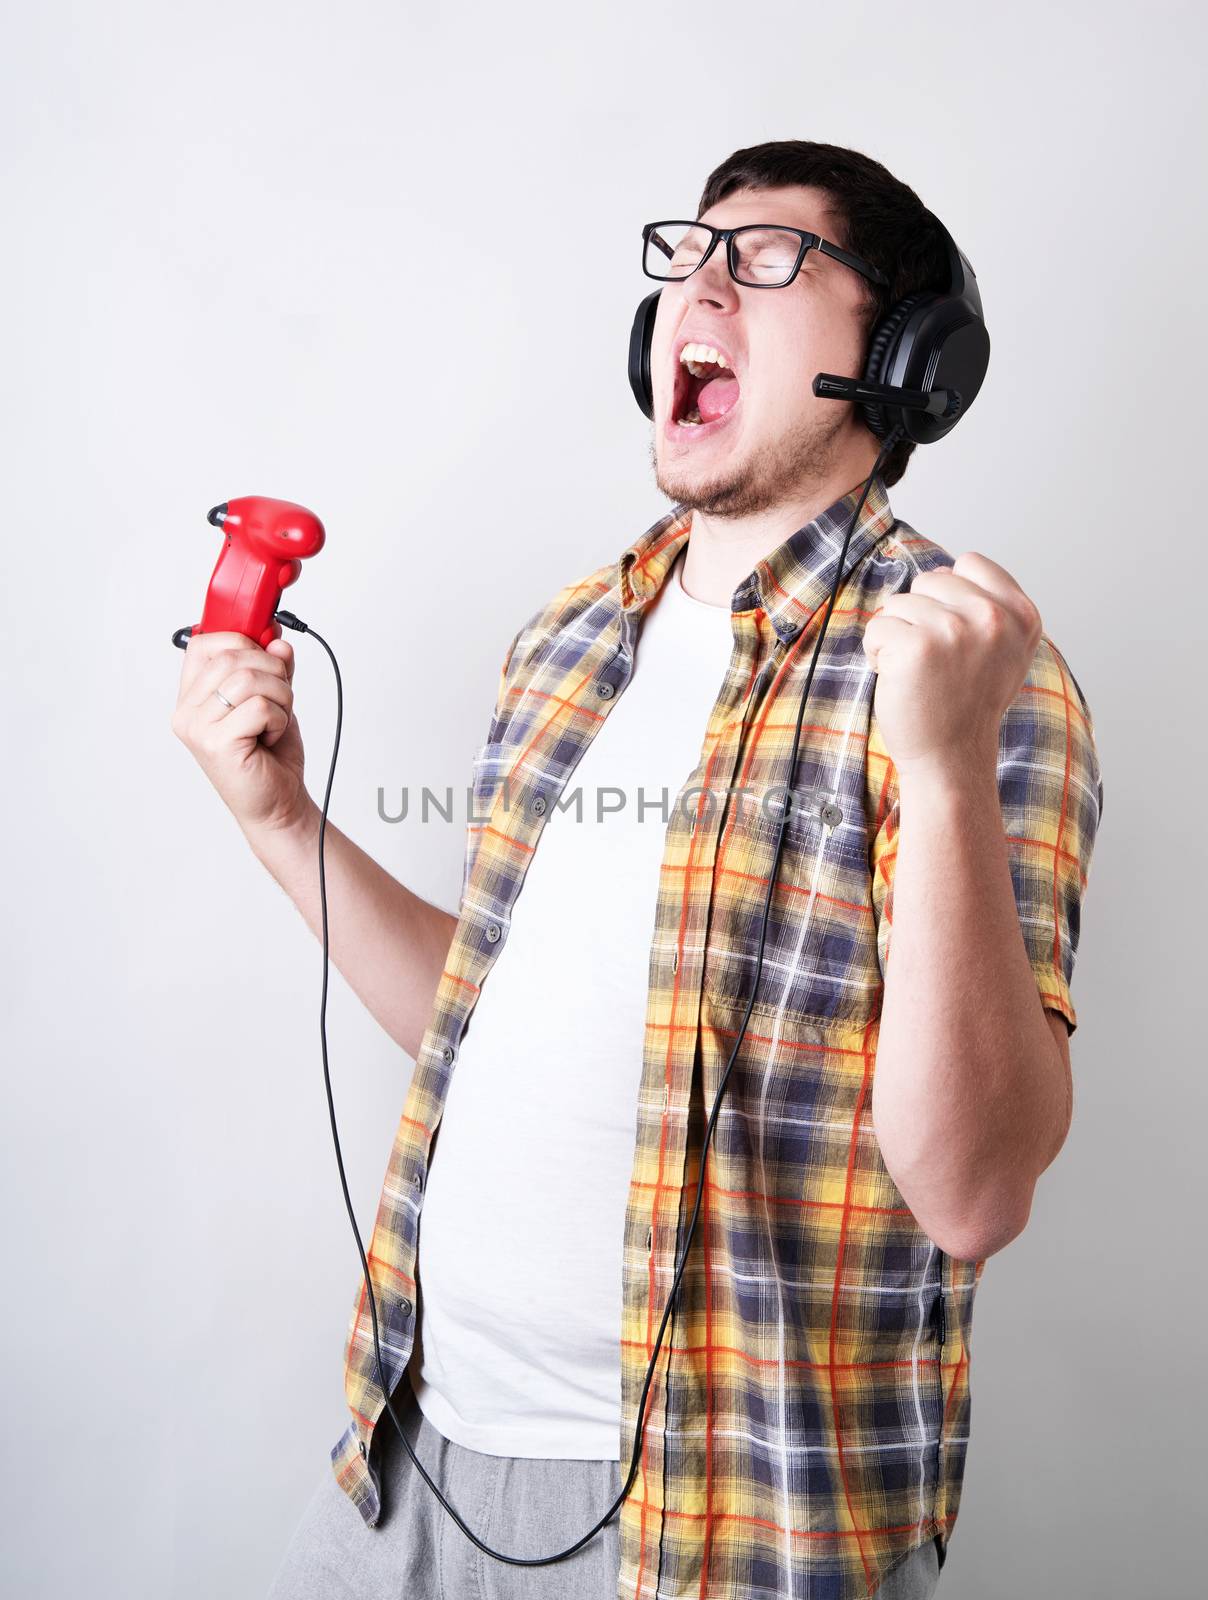 Stay home. Funny young man screaming playing video games holding a joystick isolated on gray background